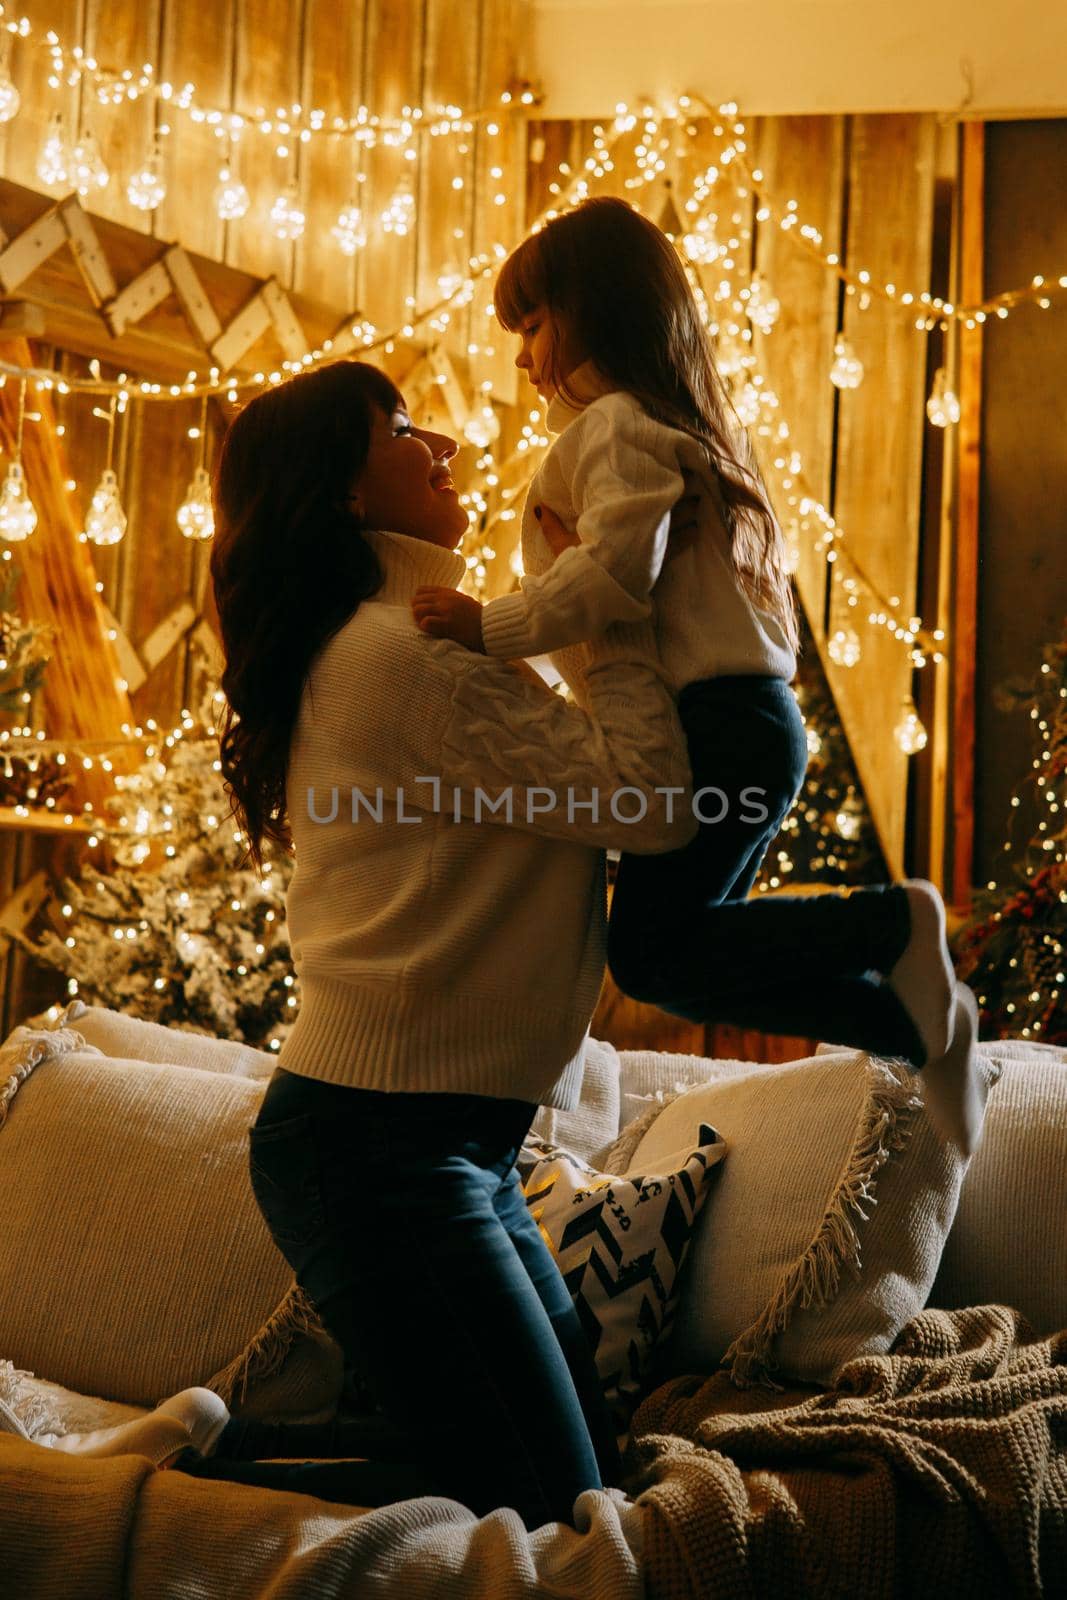 A little girl with her mother in a cozy home environment on the sofa next to the Christmas tree. The theme of New Year holidays and festive interior with garlands and light bulbs. by Annu1tochka